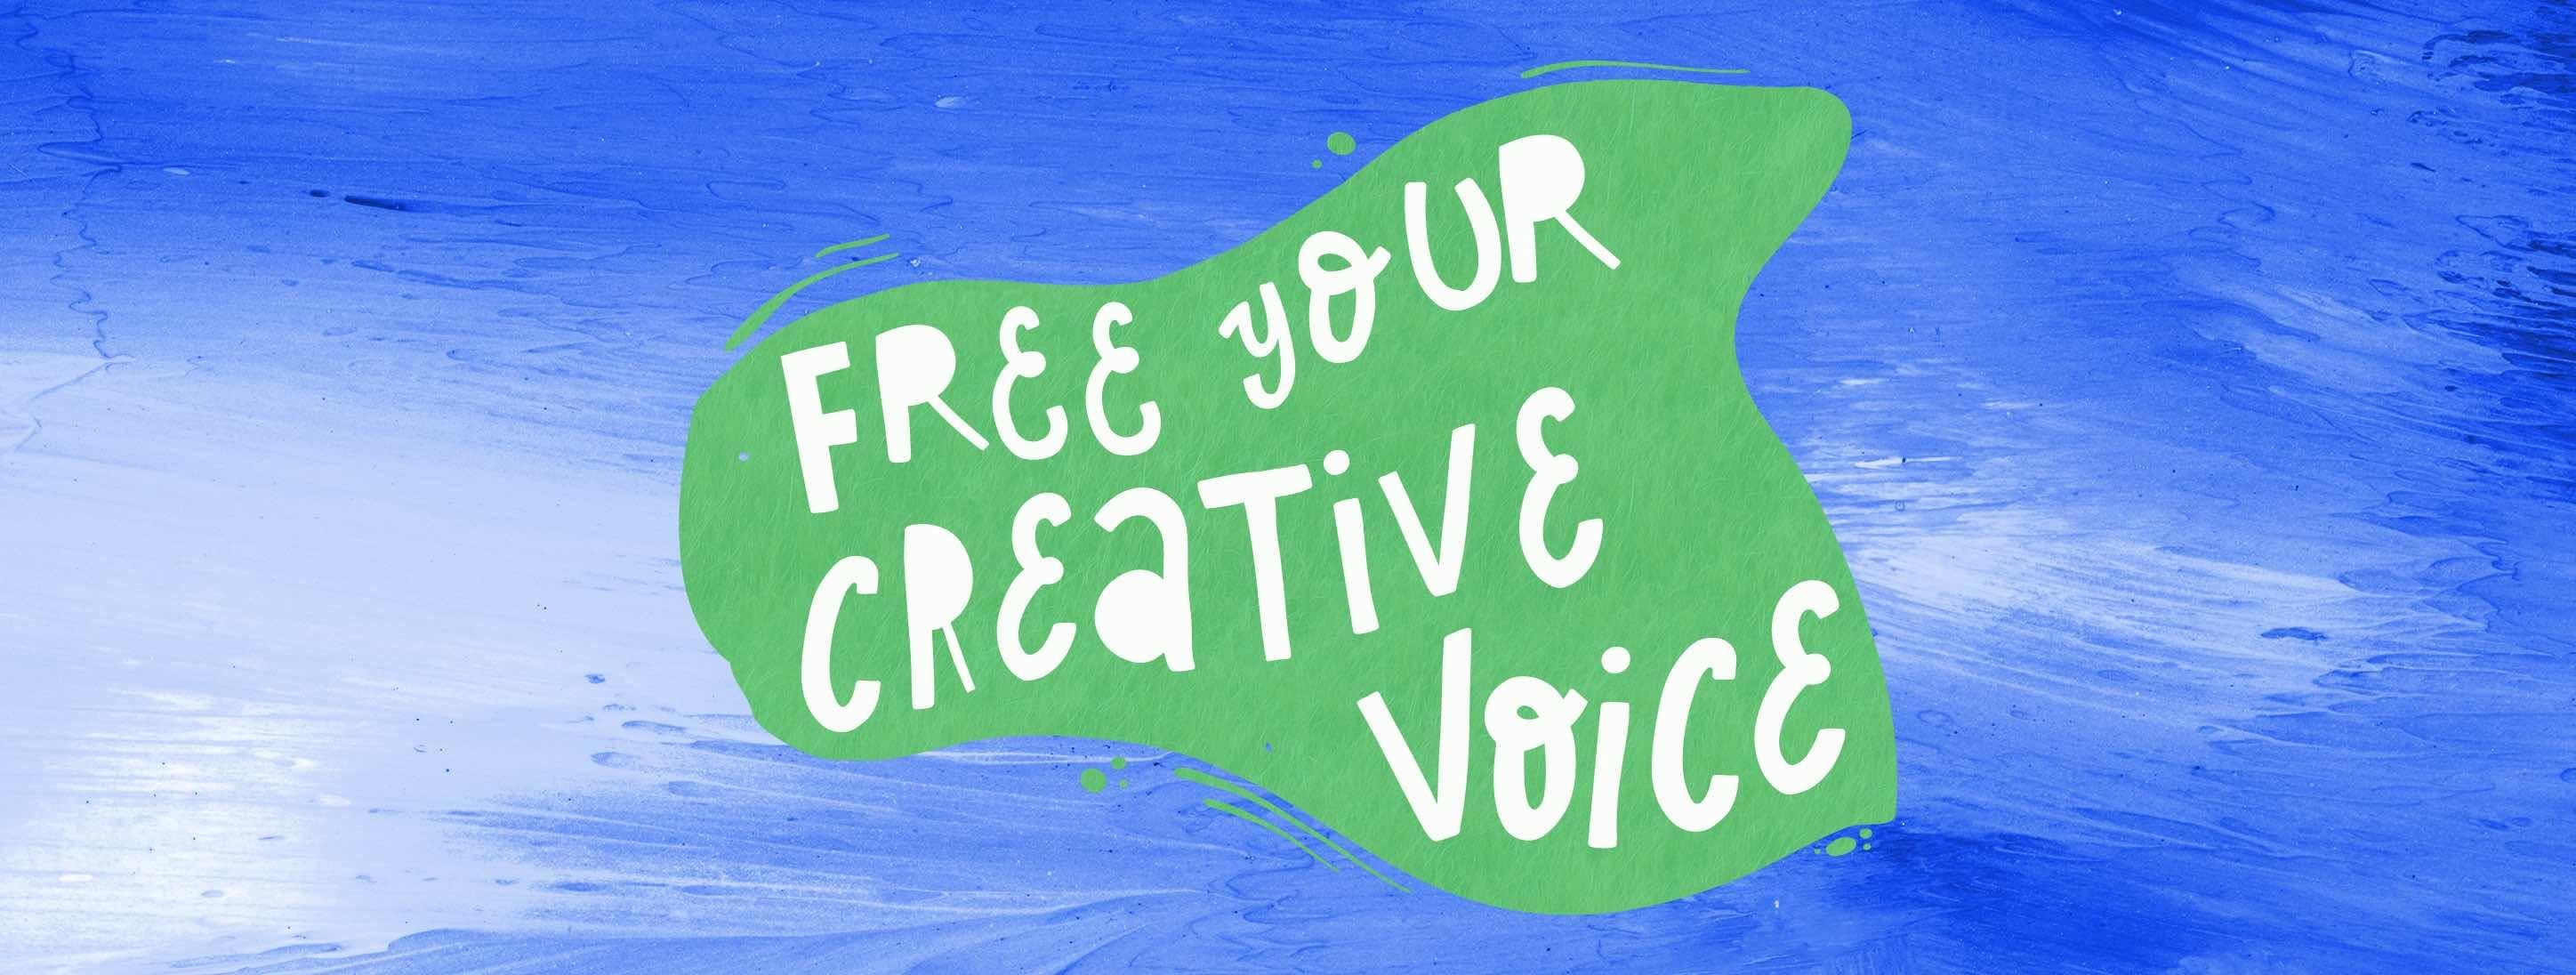 Free Your Creative Voice